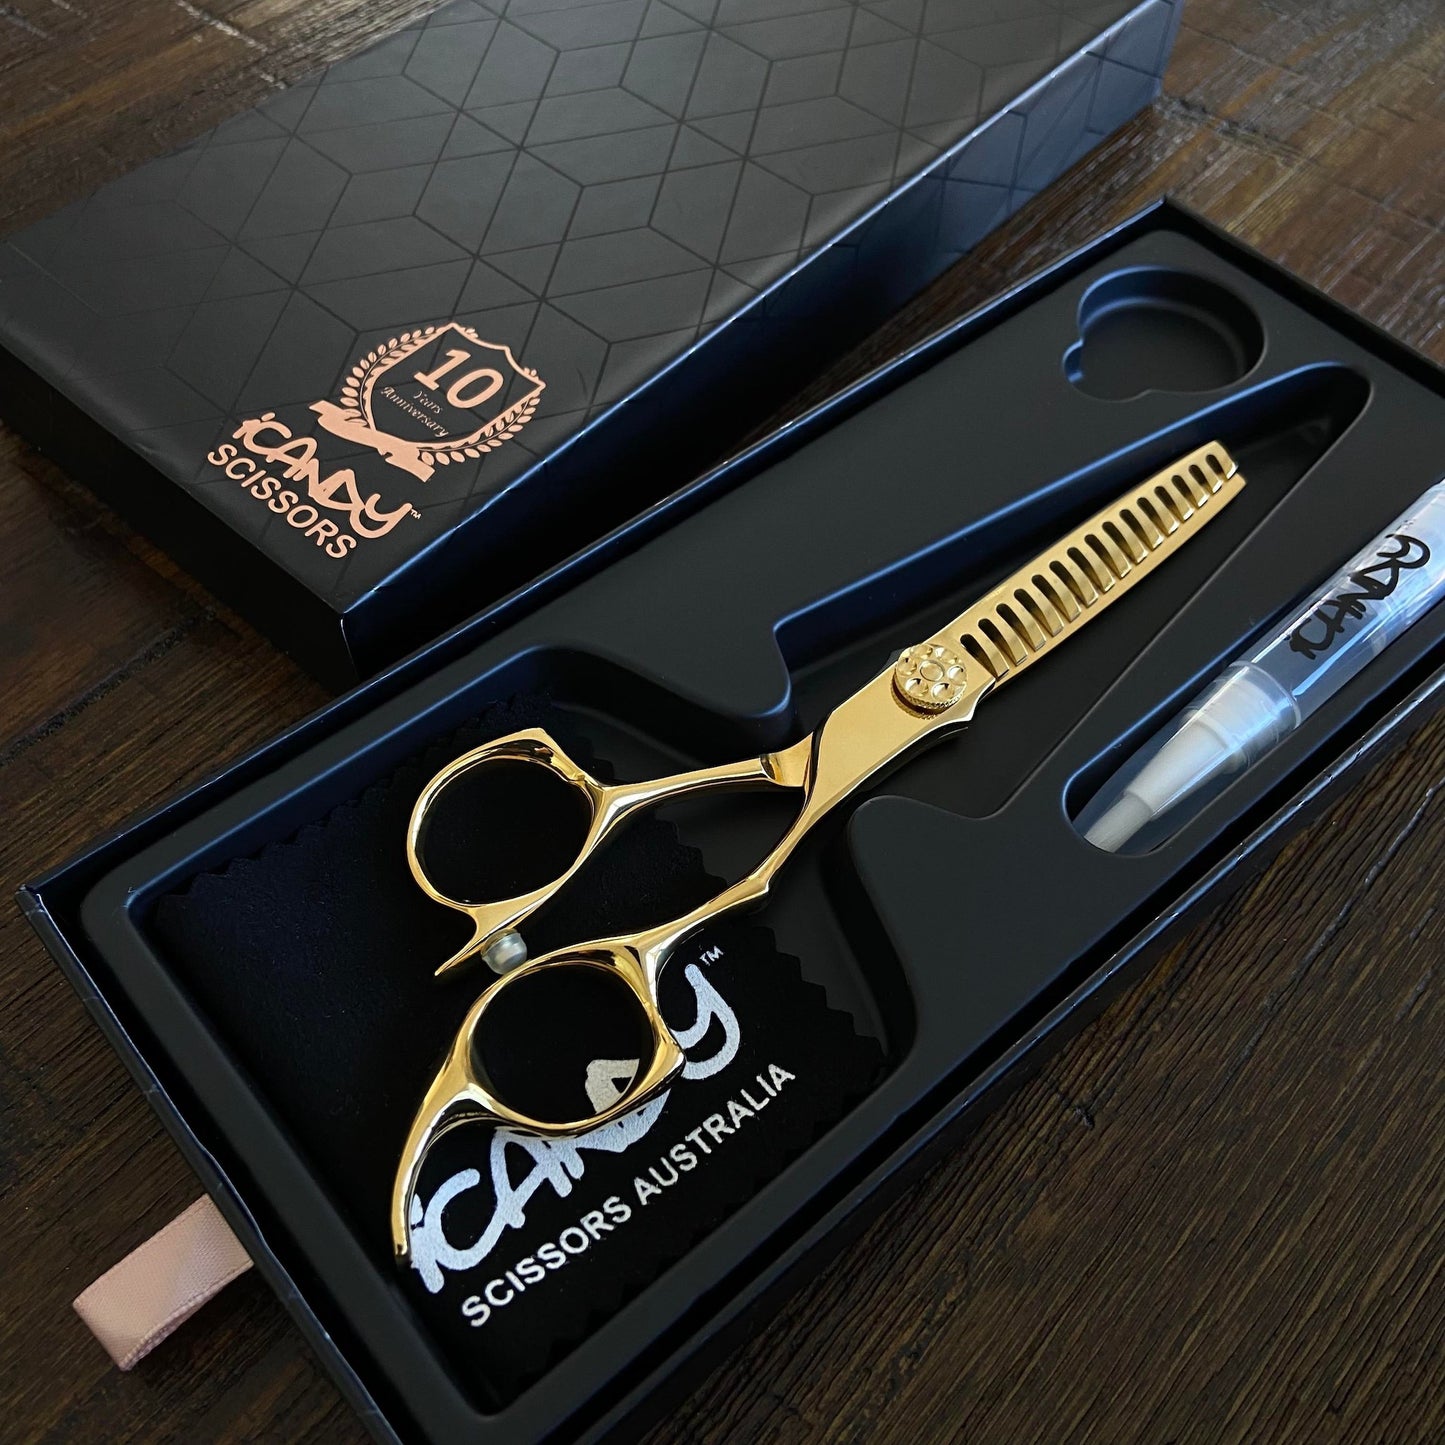 iCandy ALL STAR Yellow Gold Texturize Scissor 6.0" Open Box